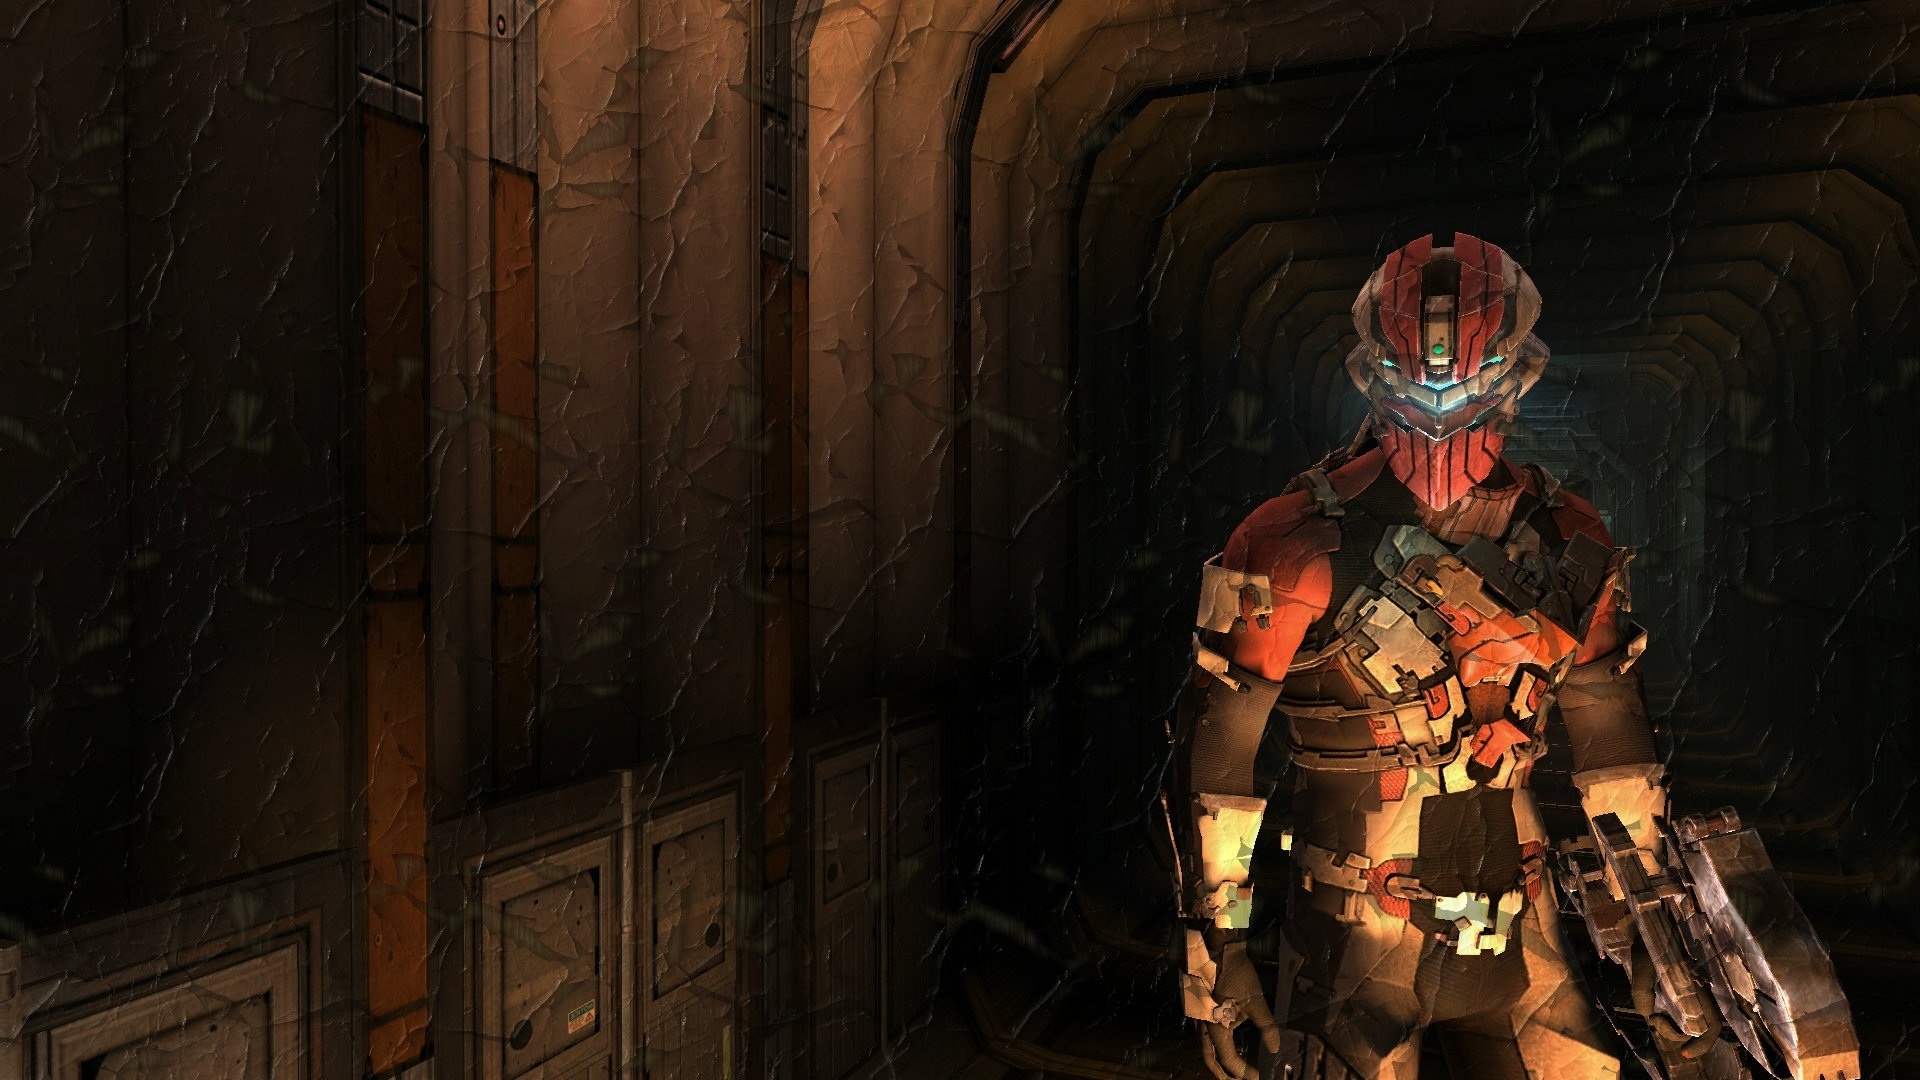 Dead Space Isaac Clarke Warrior Armor Weapons Wallpaper Background